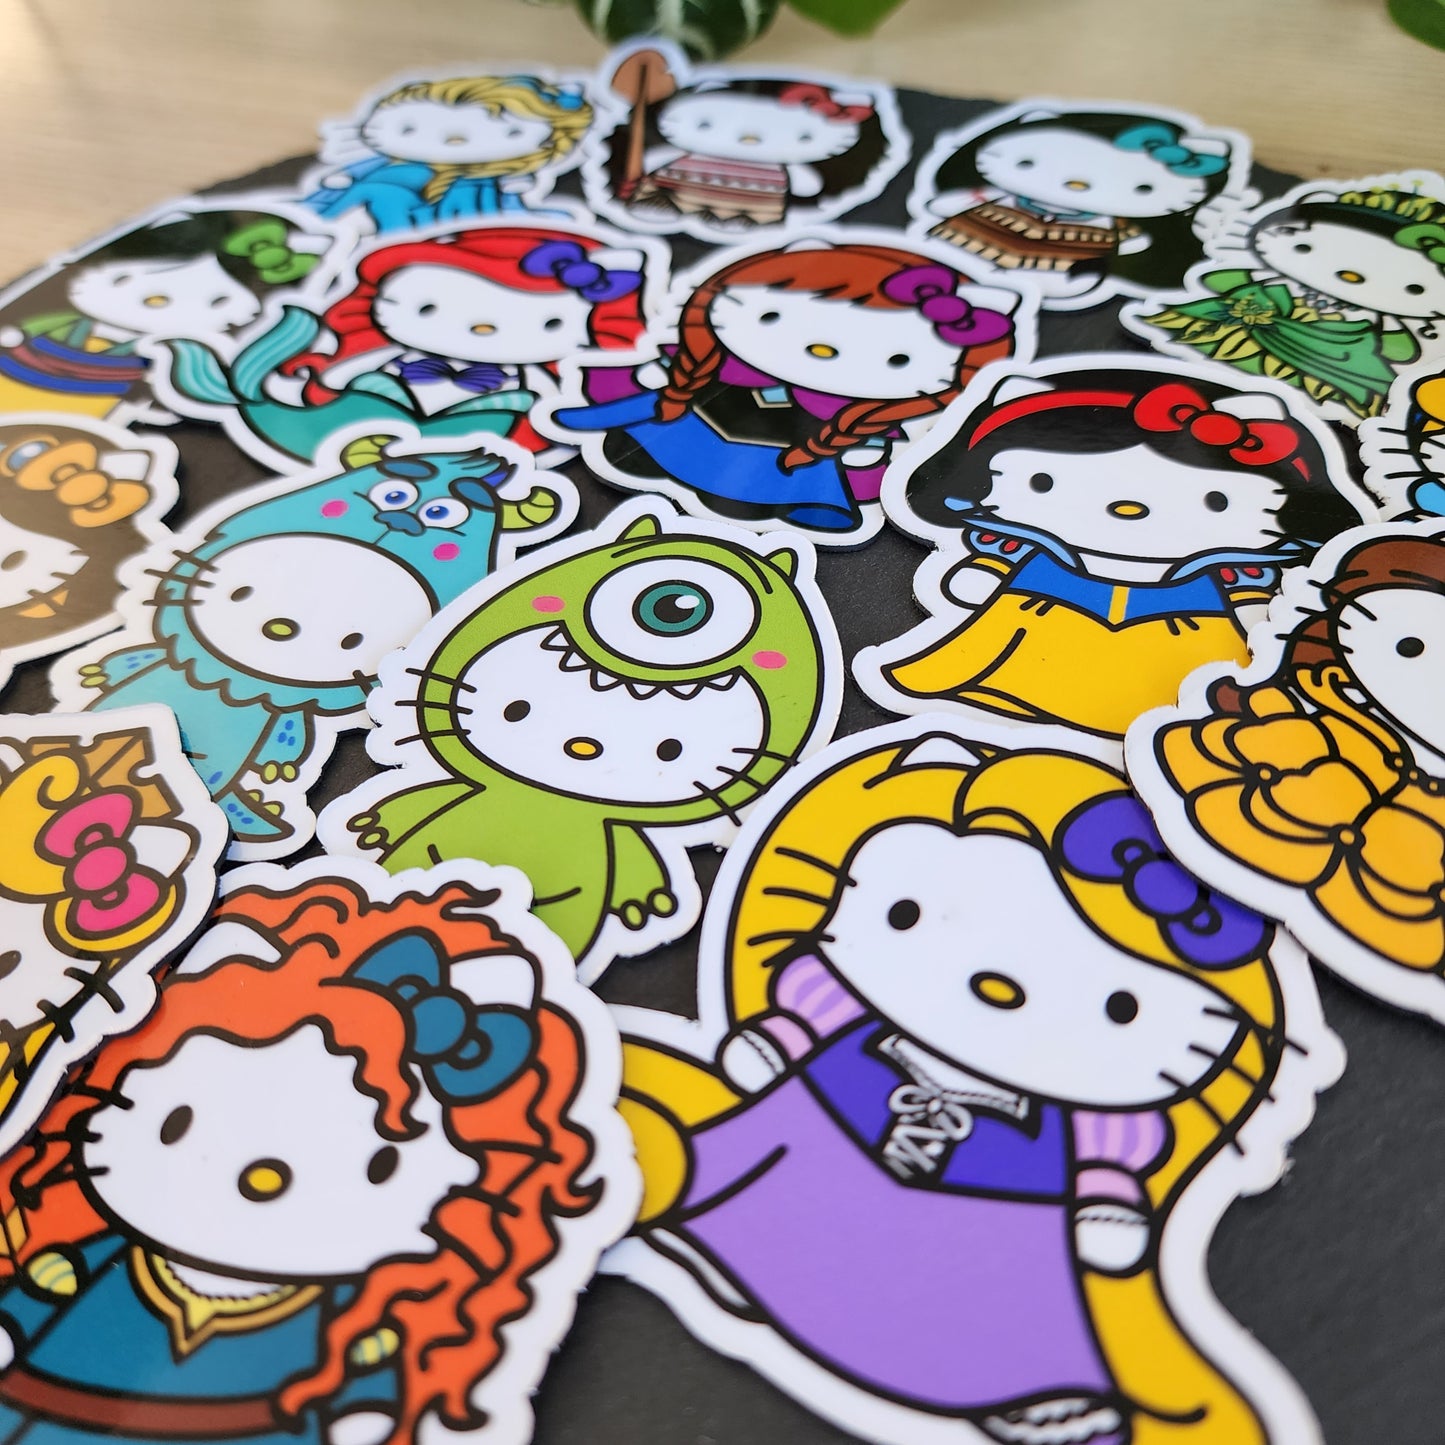 Disney Princess Hello Kitty Stickers and Magnets